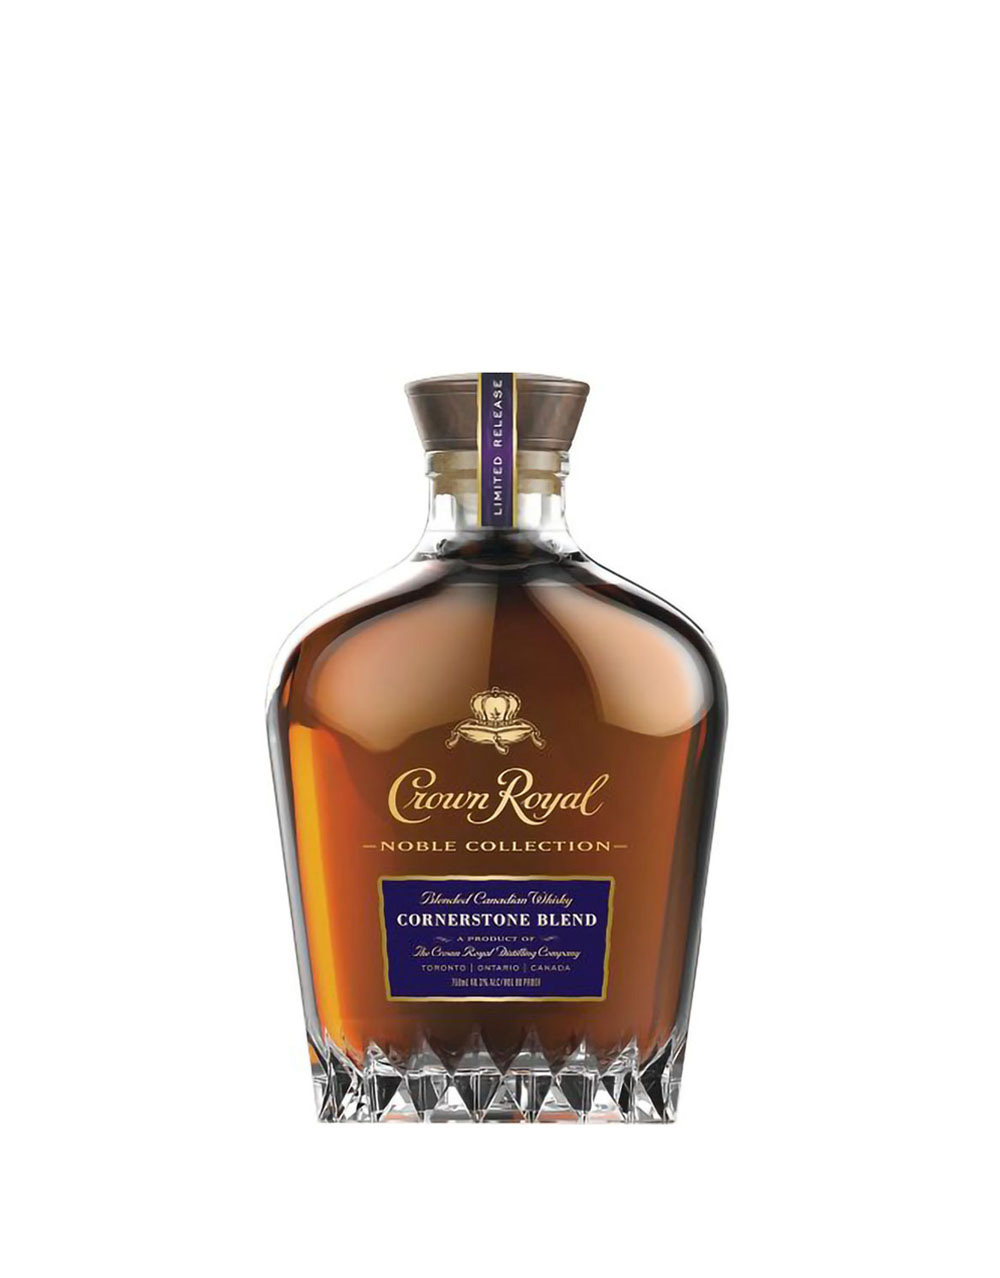 Crown Royal Noble Collection Cornerstone Blend Whisky